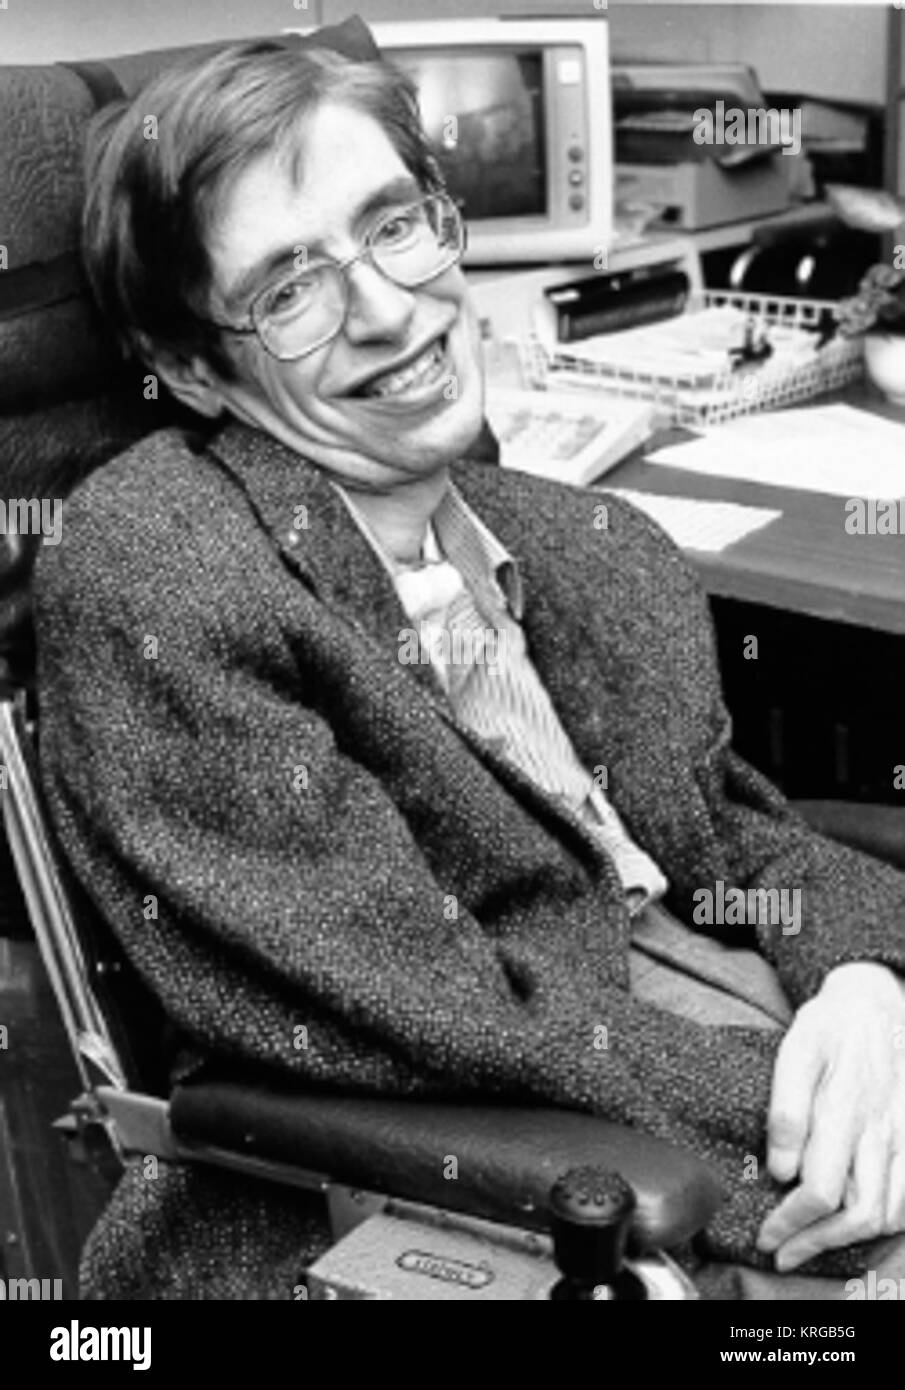 Stephen hawking Black and White Stock Photos & Images - Alamy